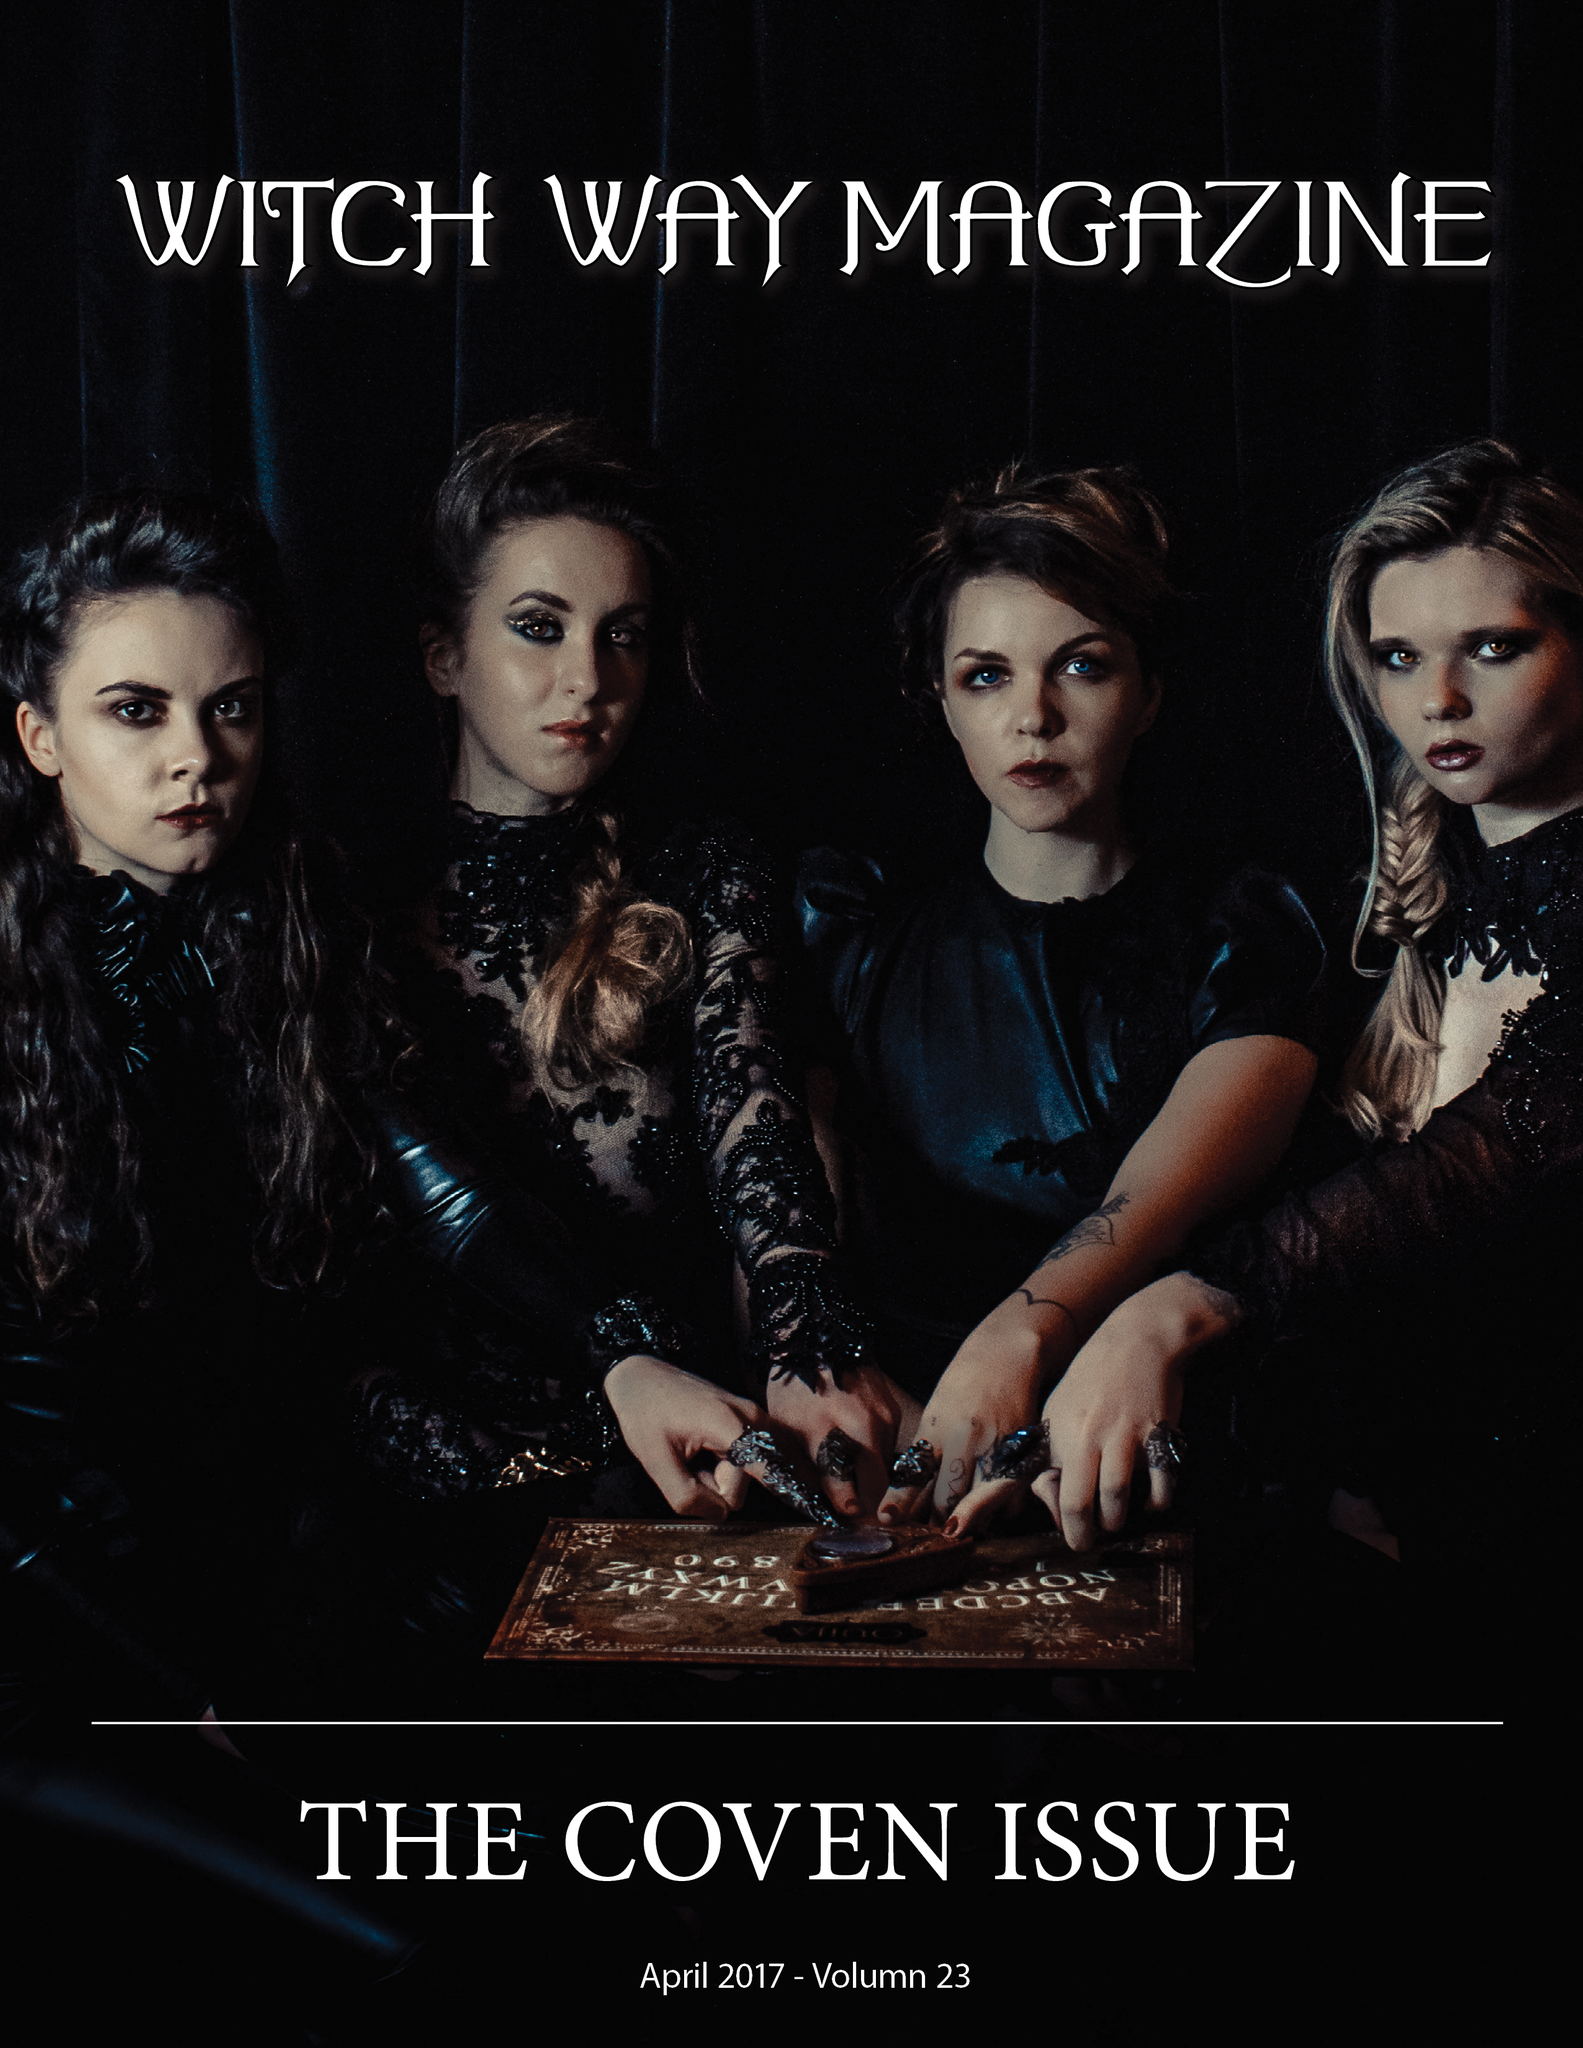 April 2017 Vol #23 - The Coven Issue - Witch Way Magazine - Digital Issue